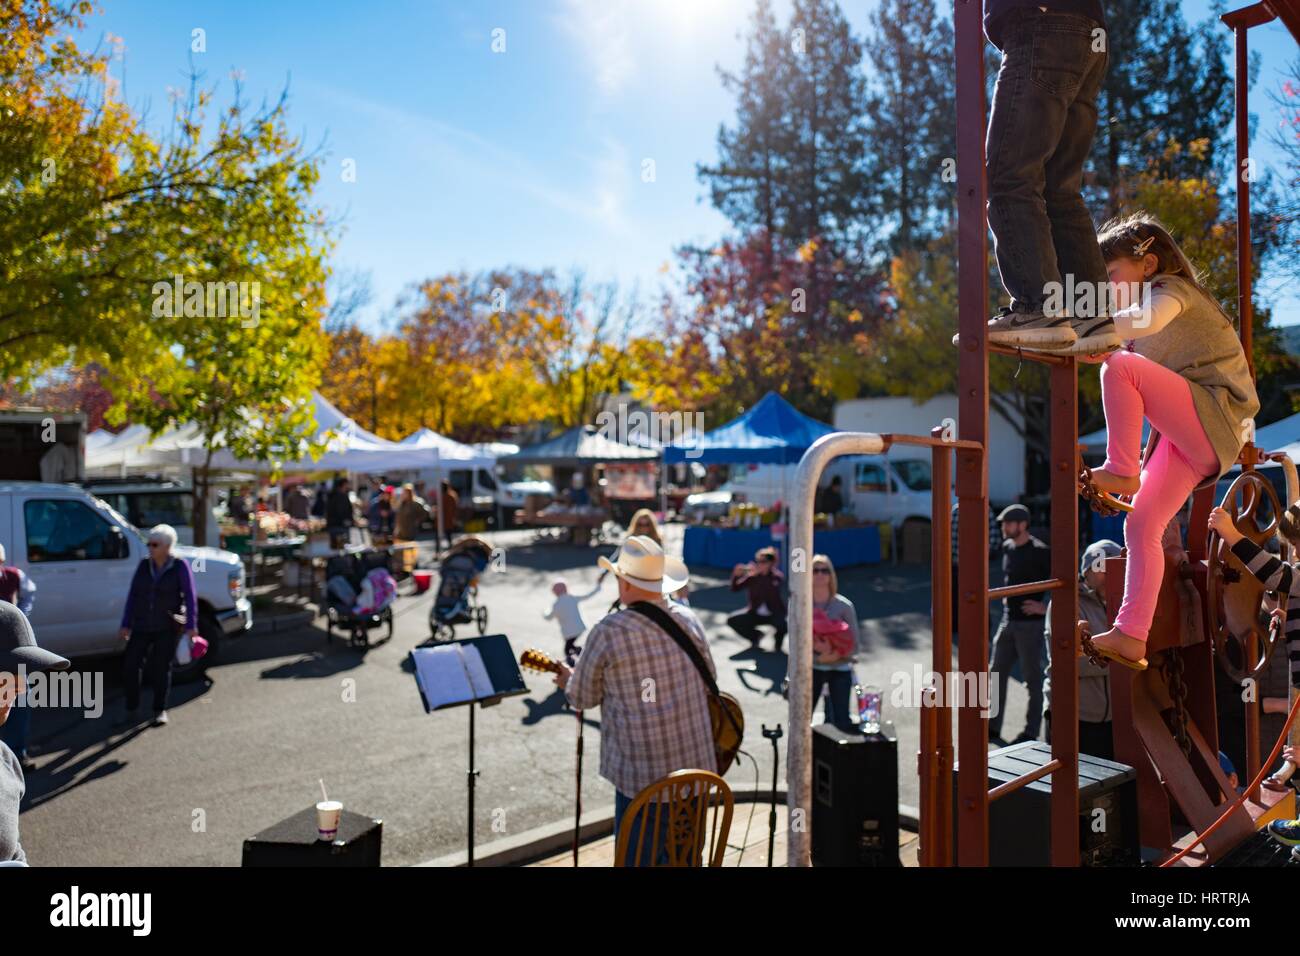 Children climb and play on a ladder while a bluegrass musician plays music during a farmer's market in Danville, California, December 3, 2016. Stock Photo